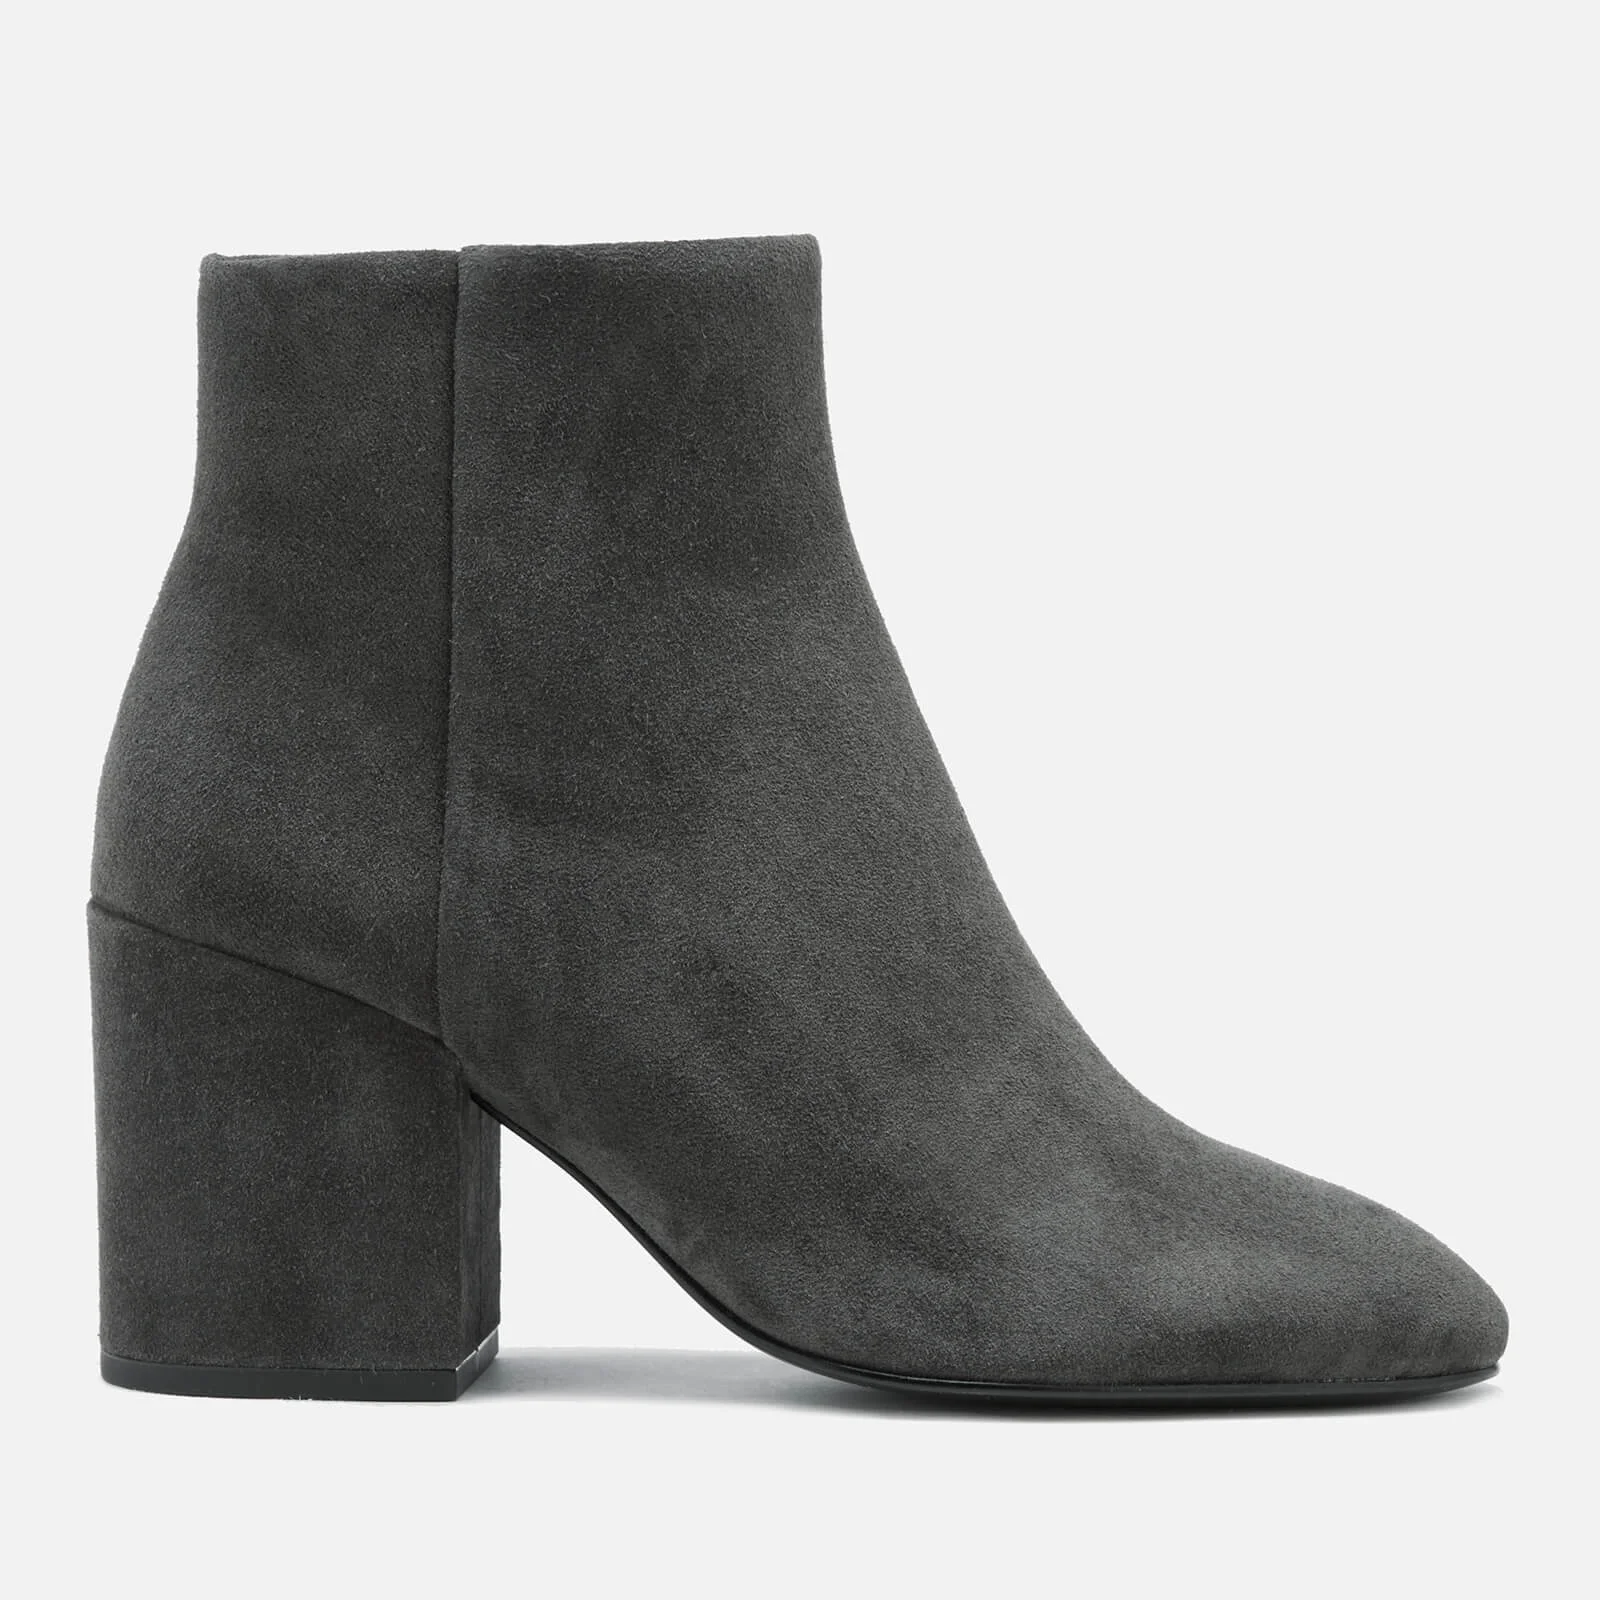 Ash Women's Eden Suede Heeled Ankle Boots - Bistro Image 1